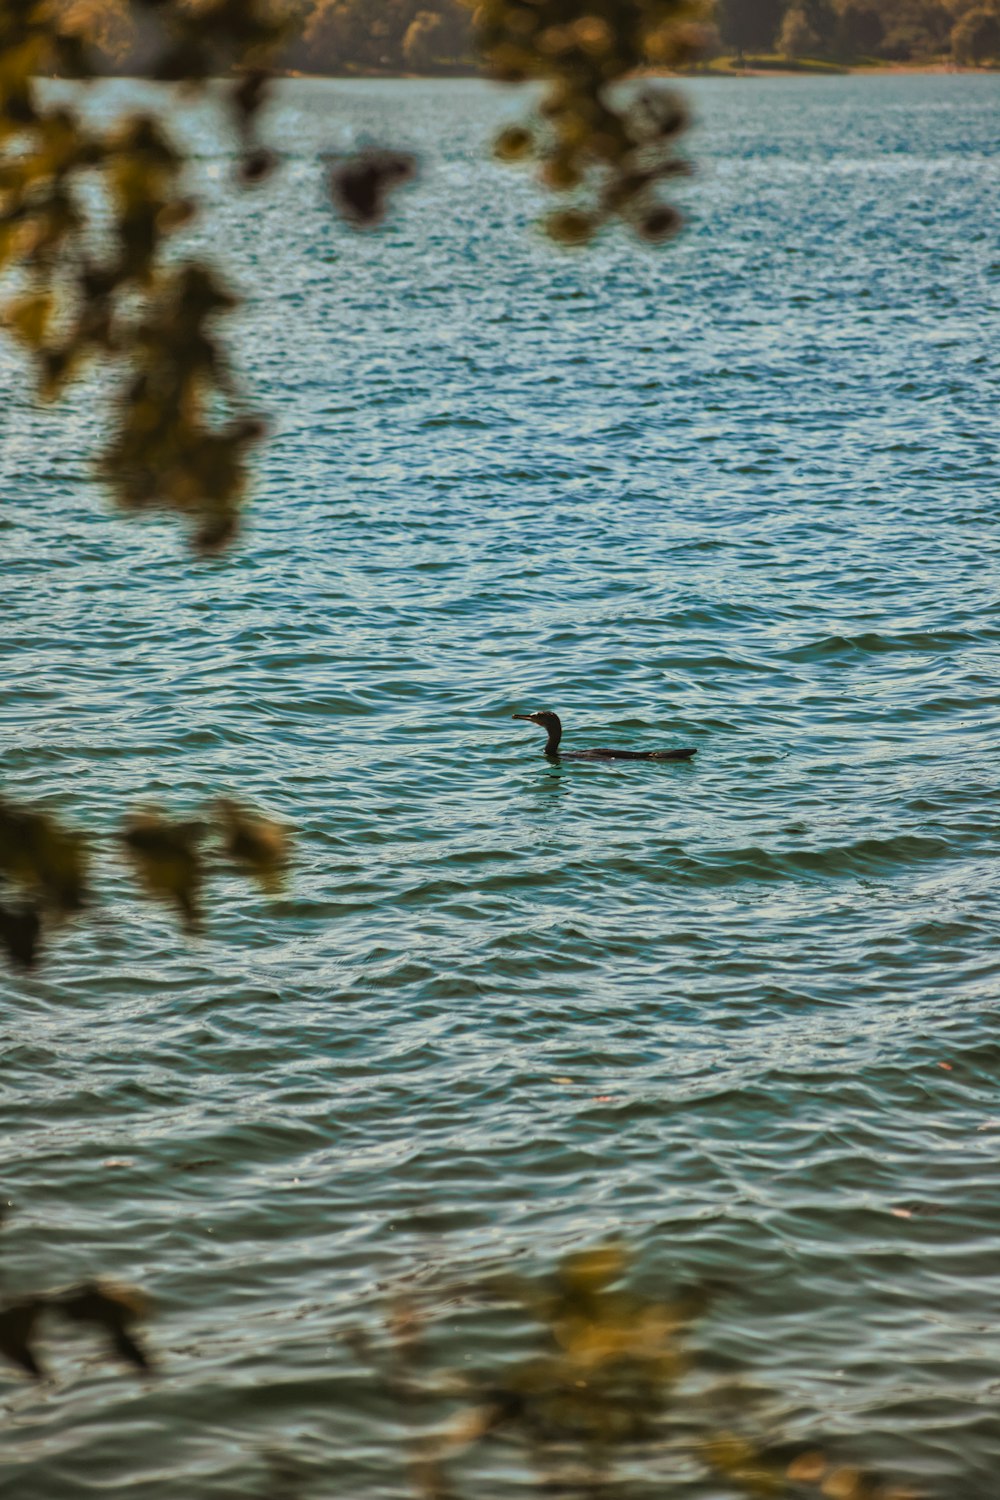 a bird swimming in a lake surrounded by trees